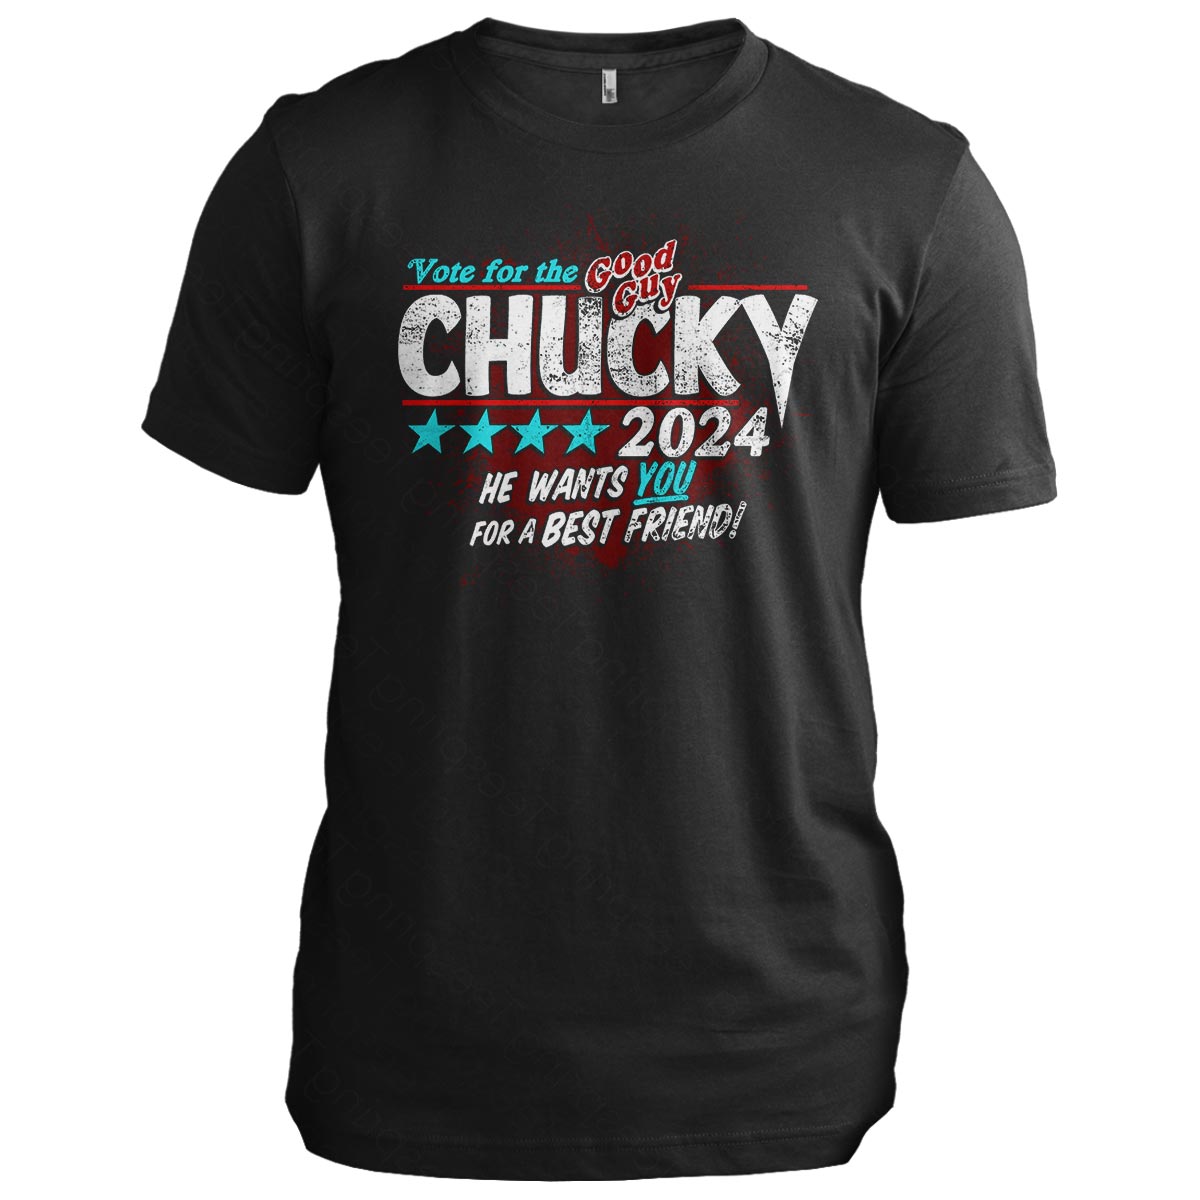 Chucky 2024: Vote for the Good Guy